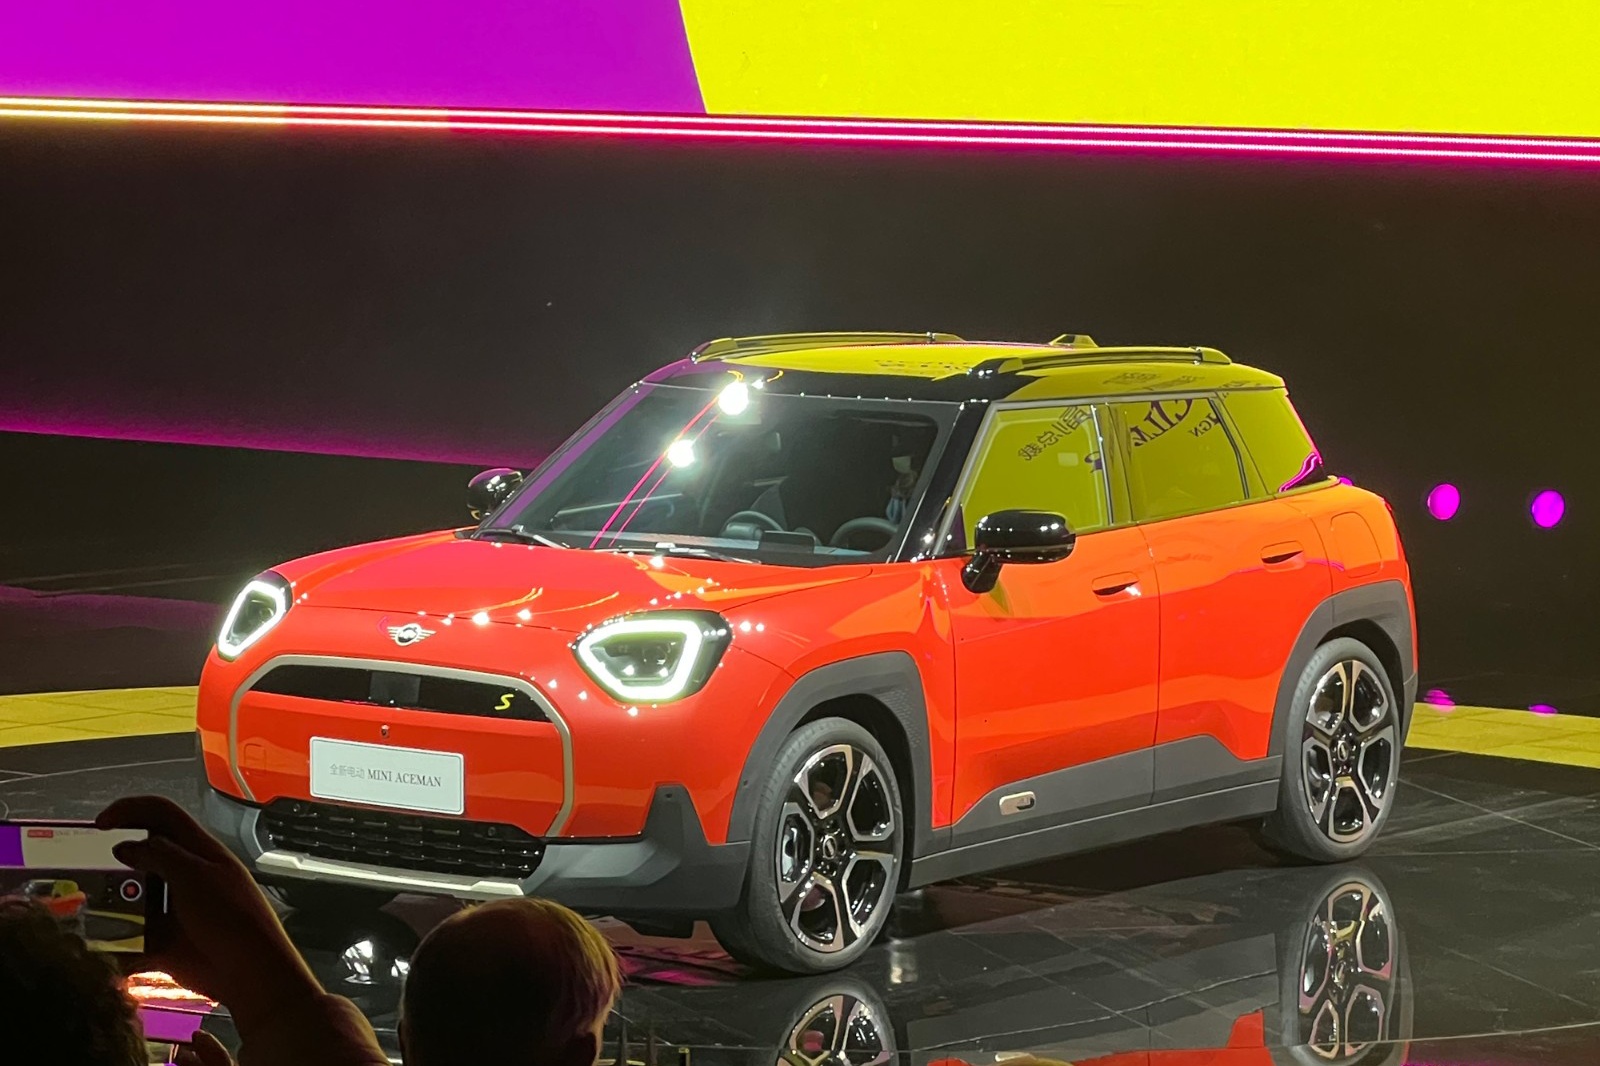 On April 24th, MINI unveiled its first 5-seater crossover, the all-new electric MINI Aceman. It features a distinctive design, digital technology infusion, a 54.2kWh battery, 160kW motor, 450km range, compact proportions, and retains MINI's iconic elements.